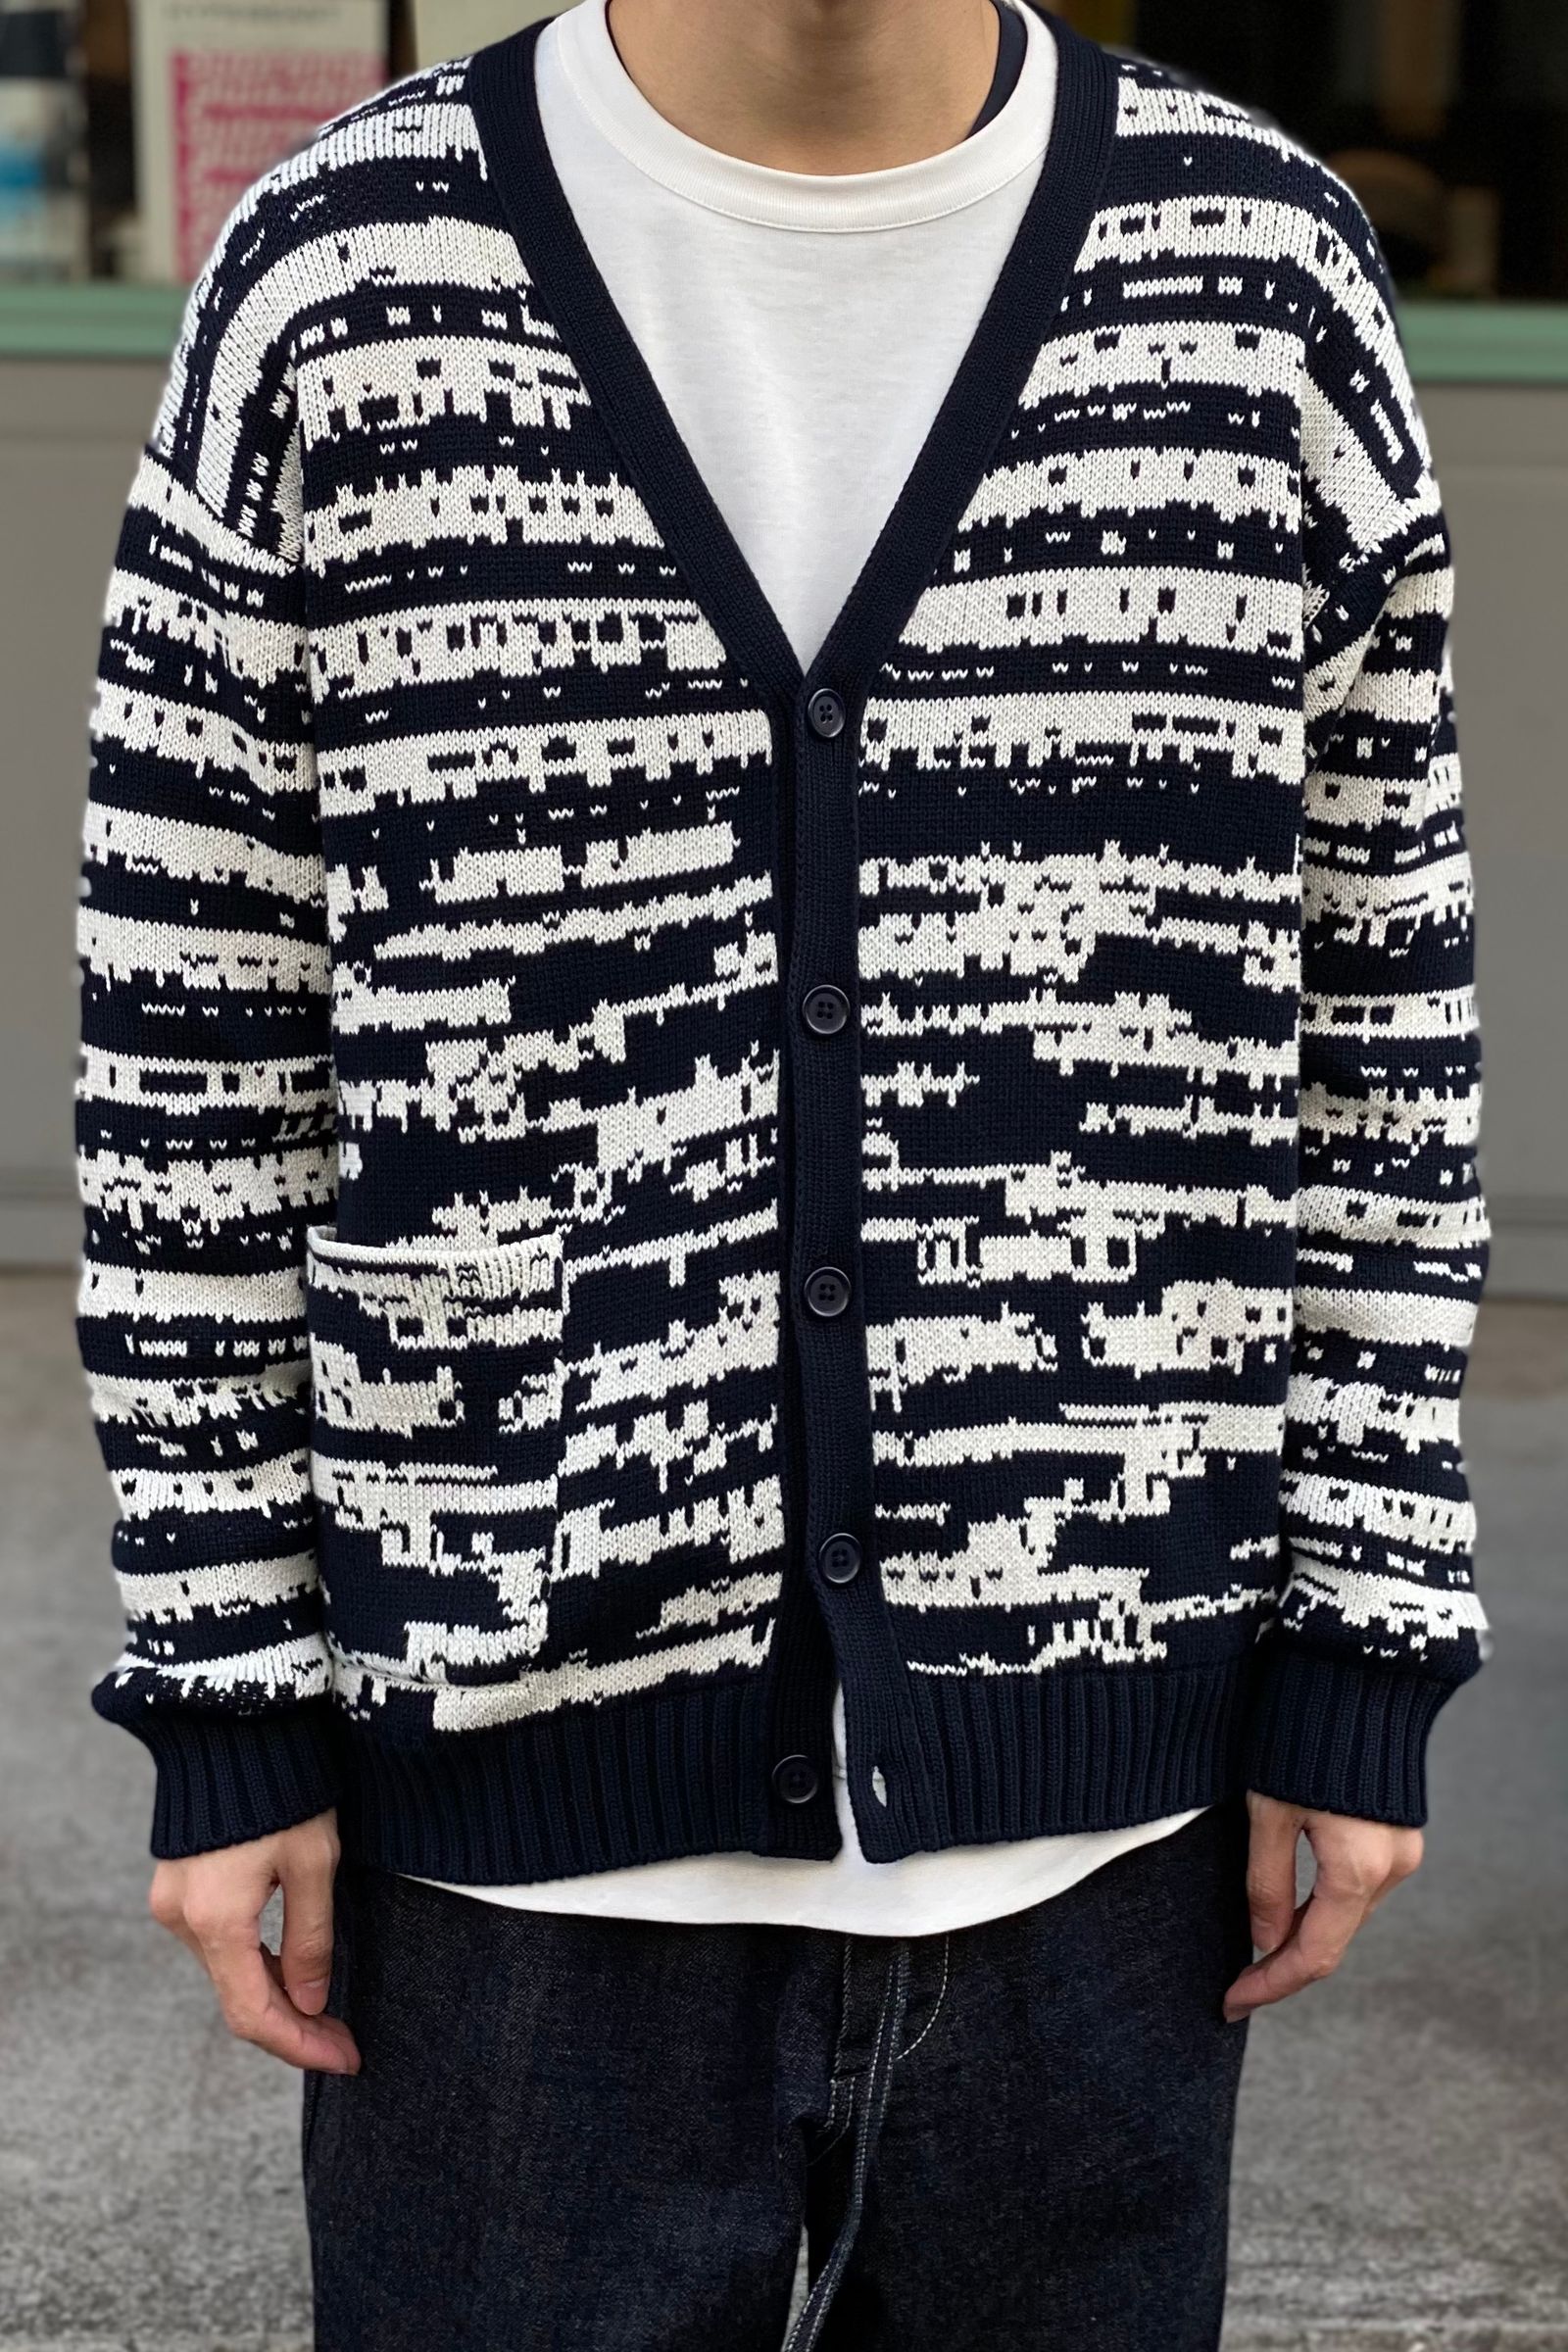 Pop Trading Company - gilles de brock knitted cardigan -navy / off ...